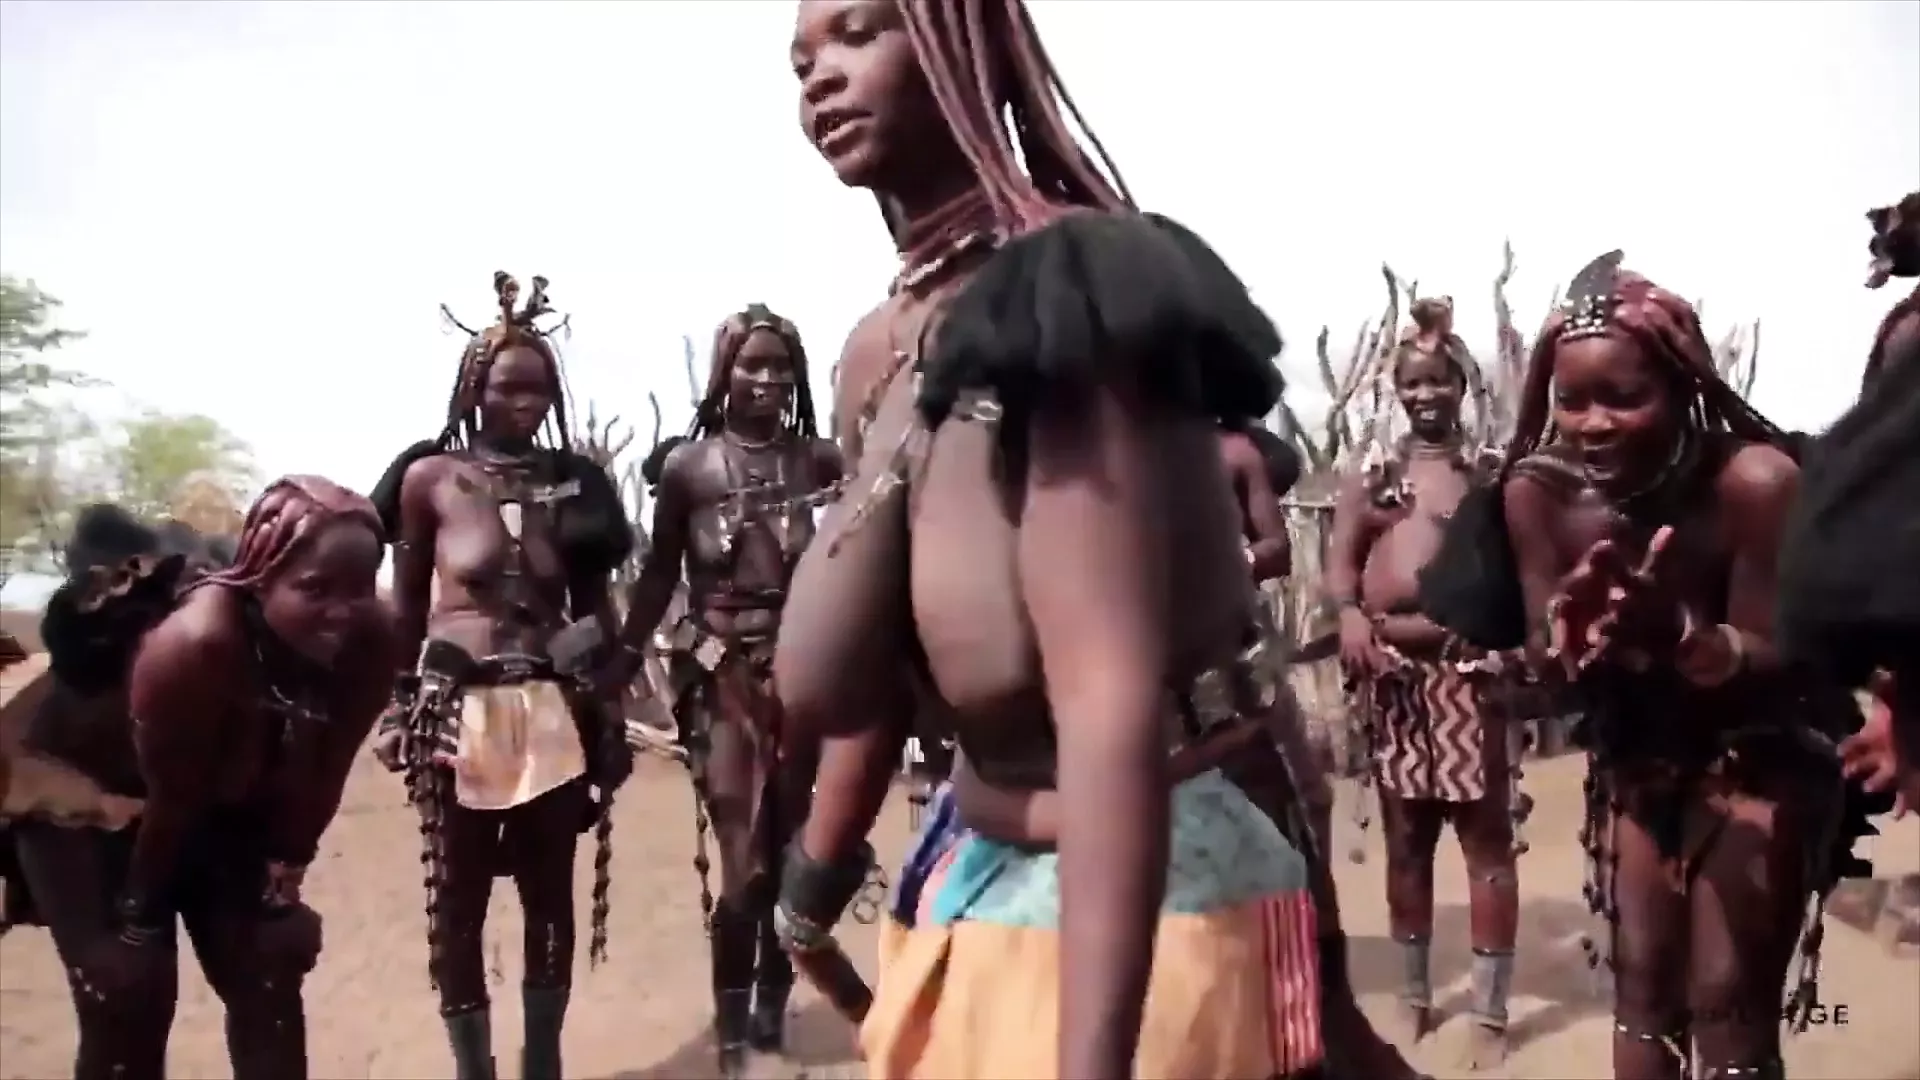 African Himba women dance and swing their saggy tits around image